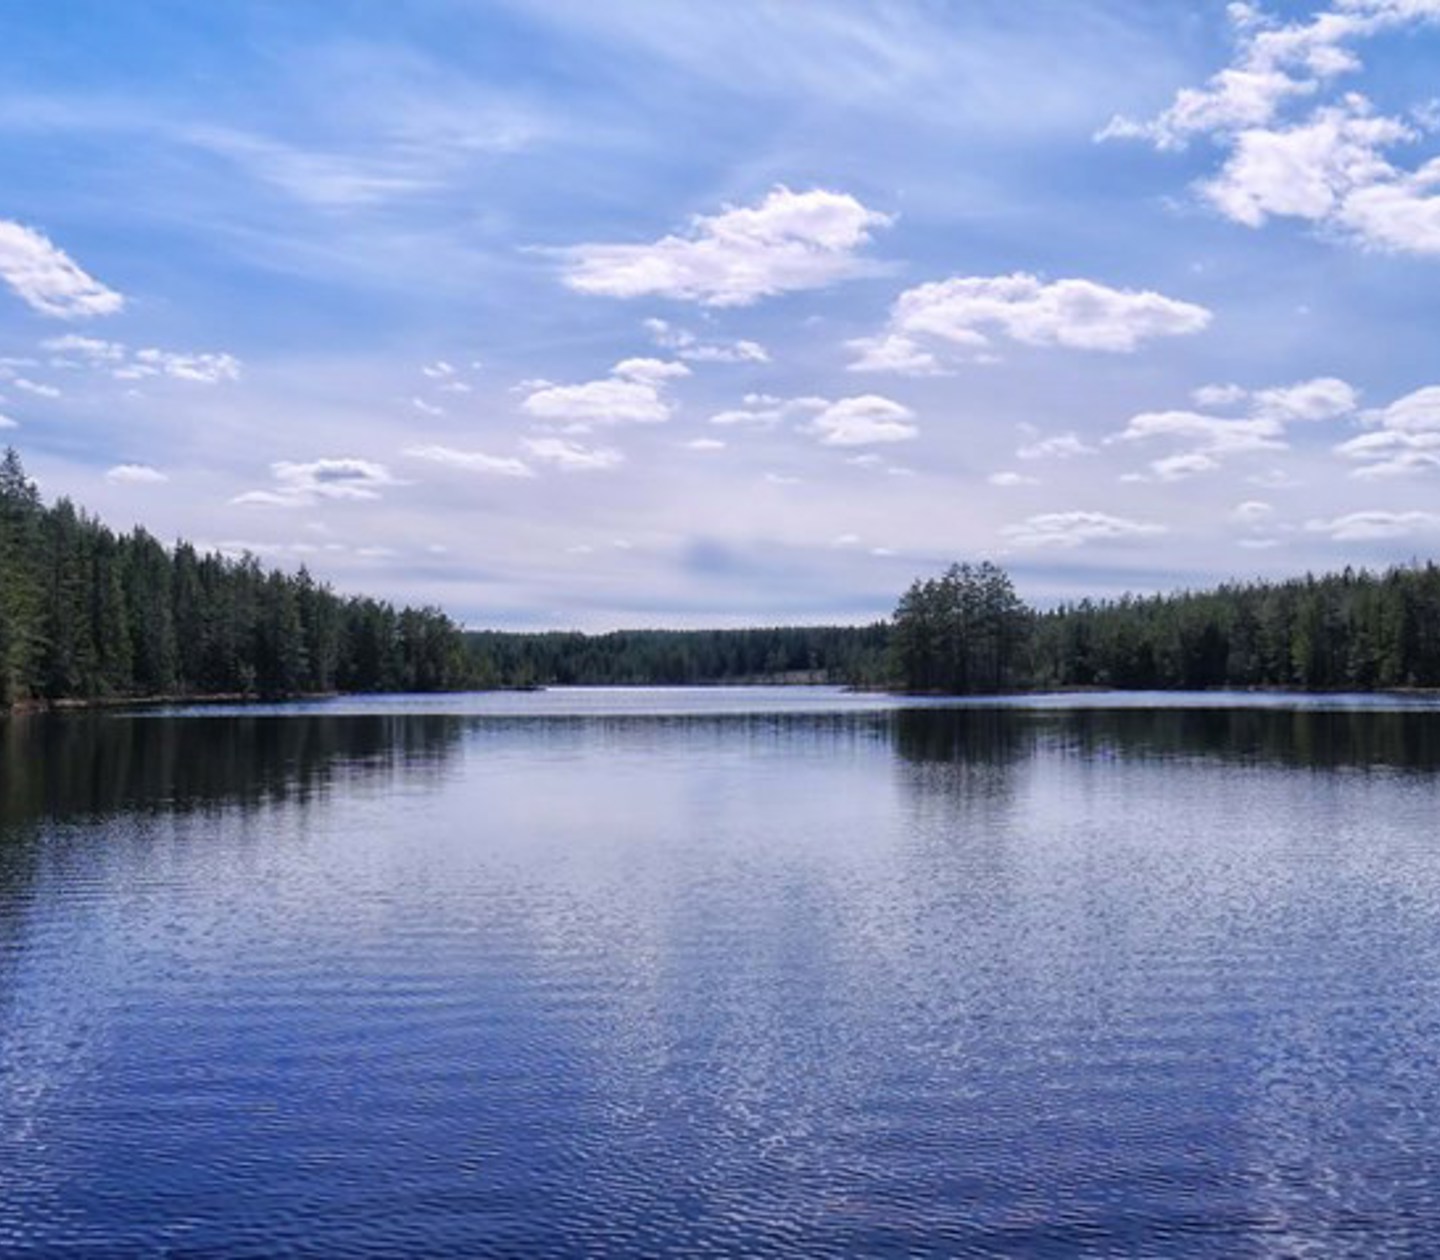 Calm lake, forest in the background and blue sky